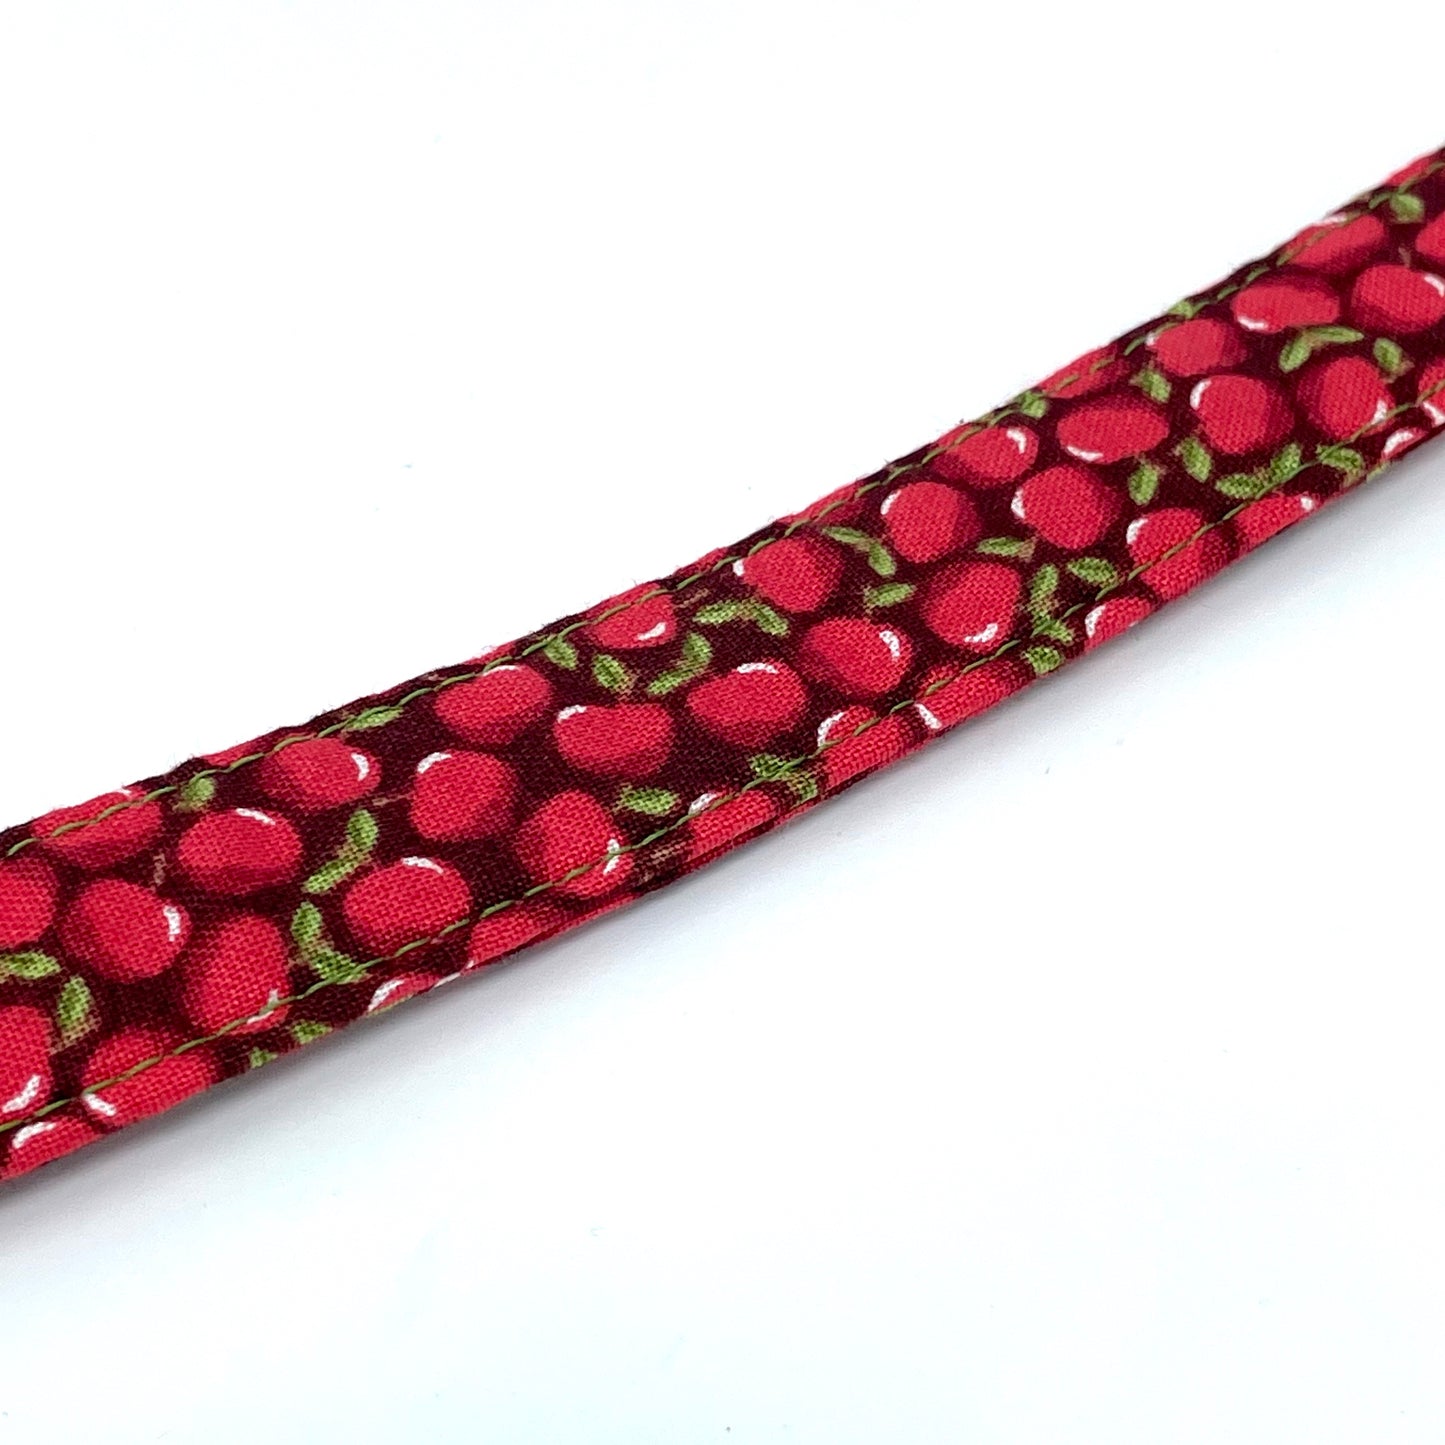 A close up image of a handcrafted red apple print fabric dog collar from Wiff Waff Designs